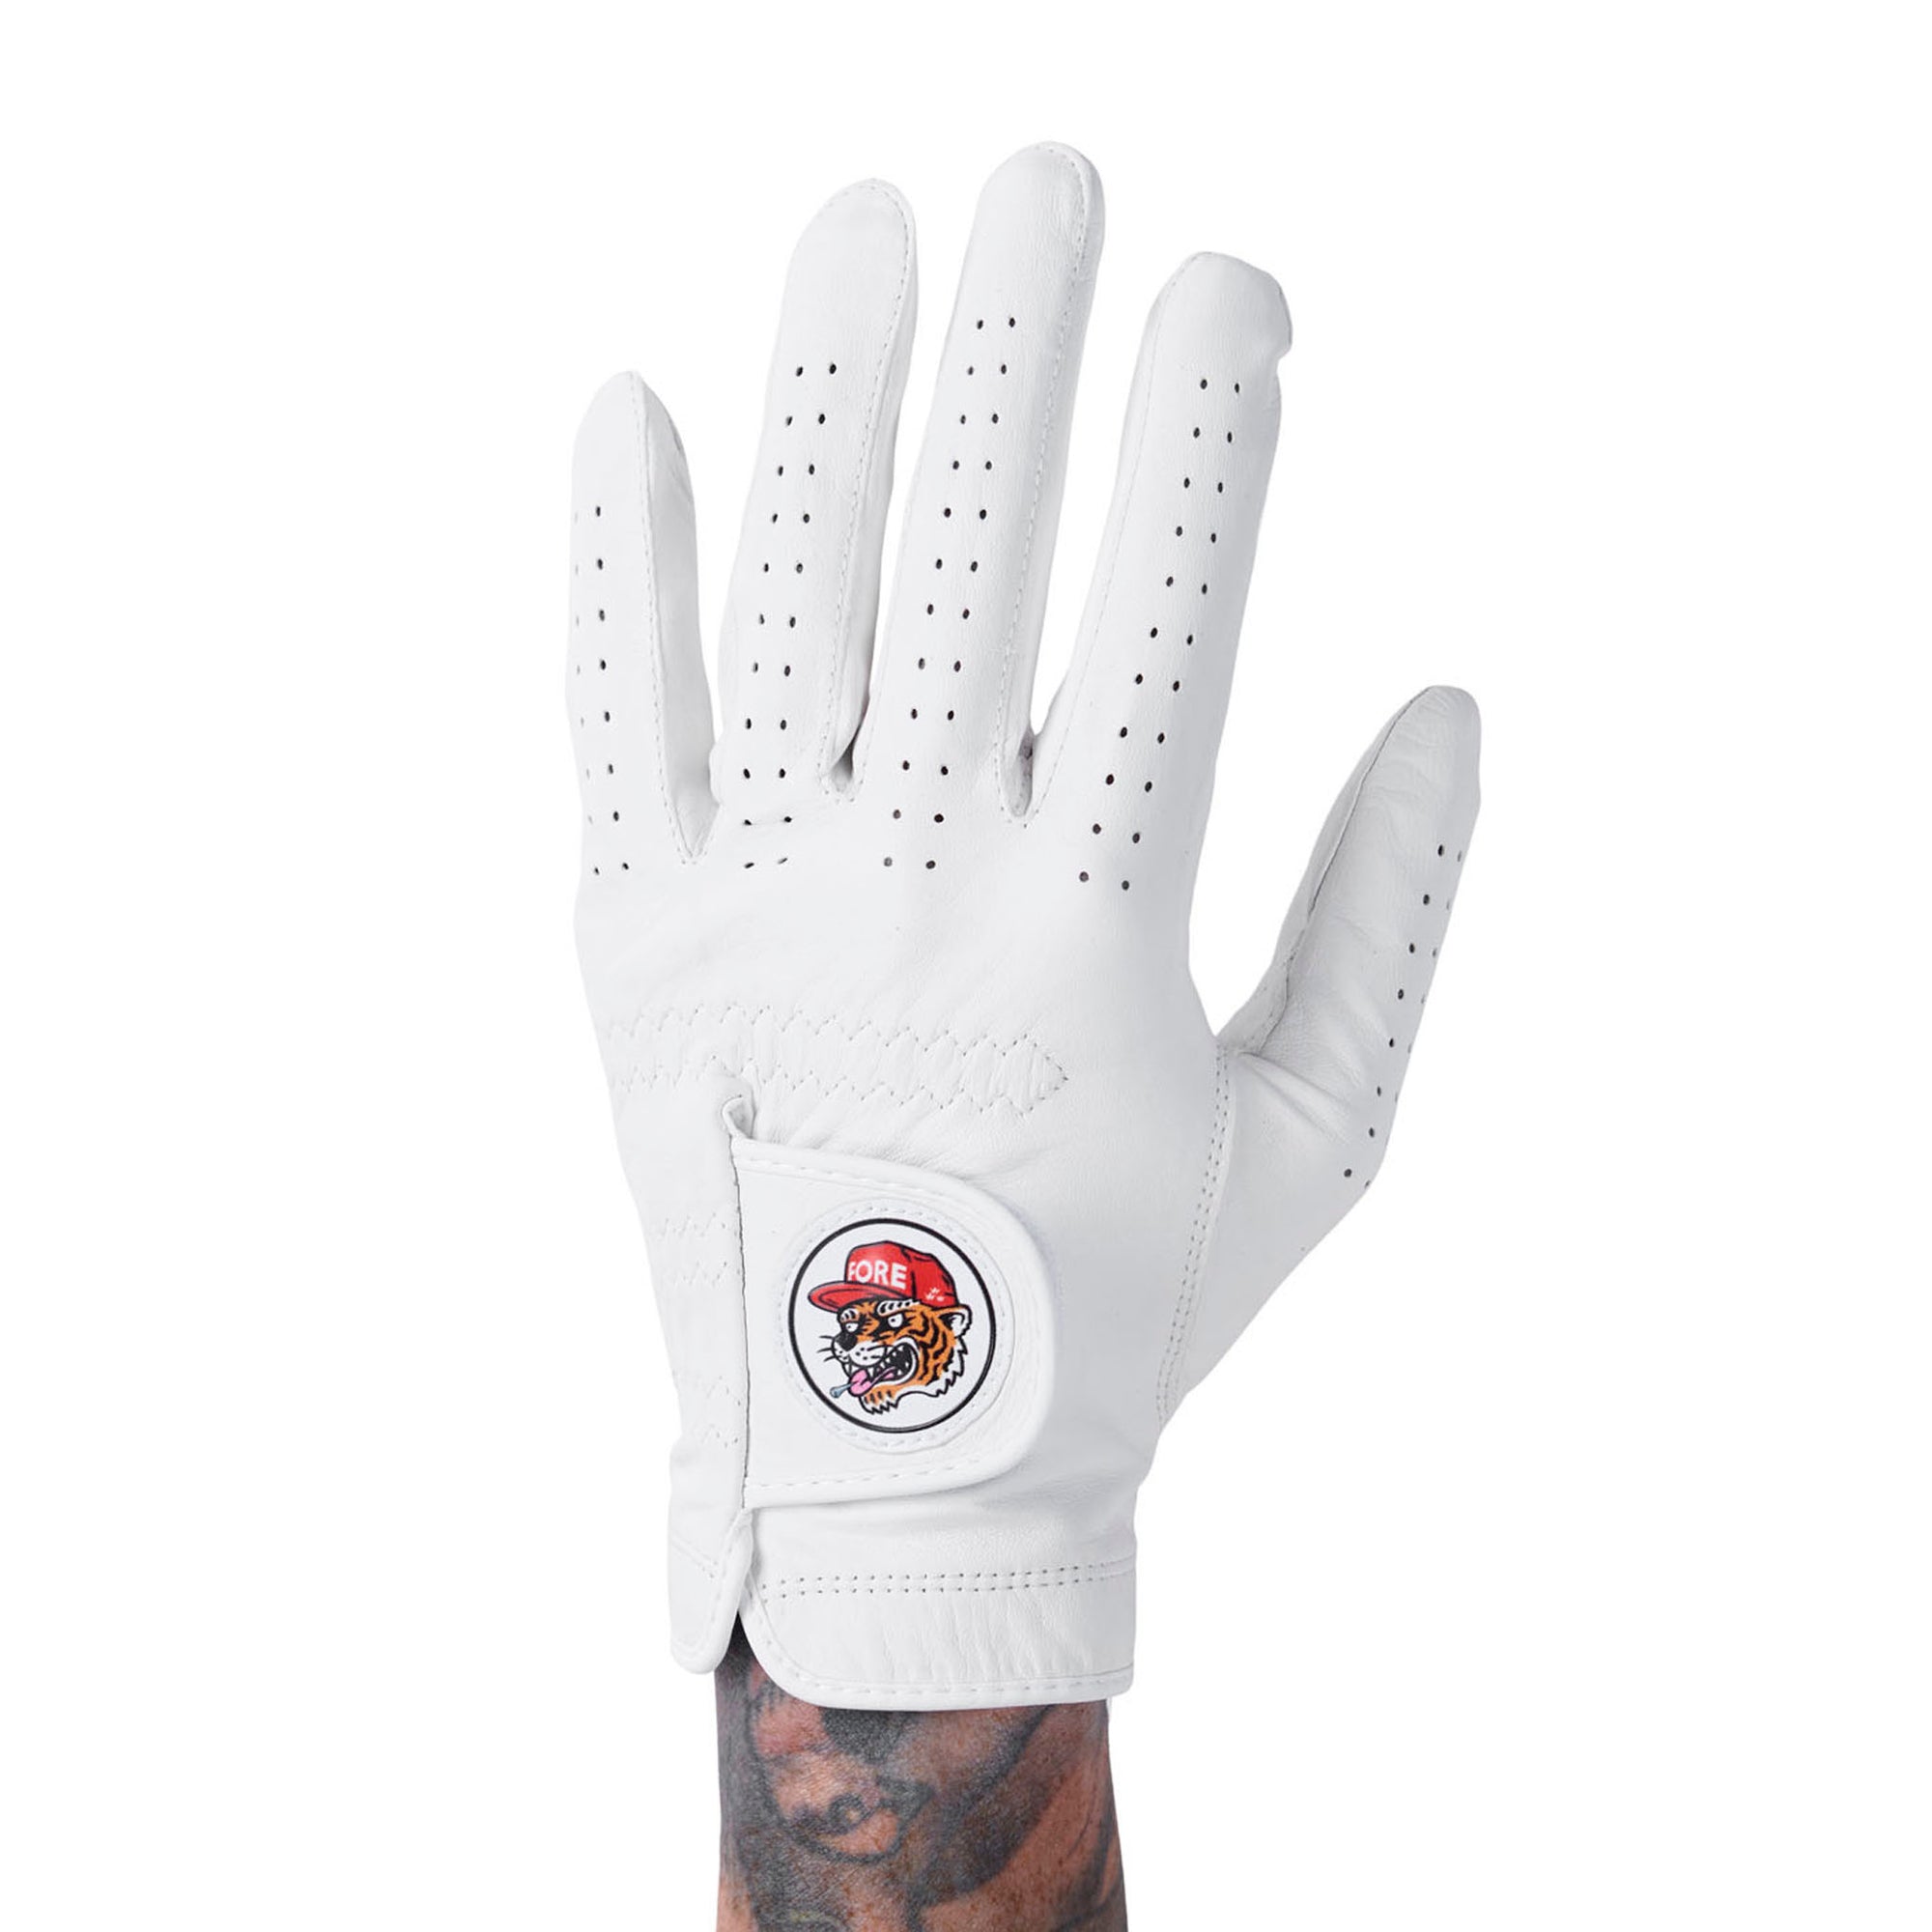 birds of condor white premium aaa cabretta leather fore tiger woods golf glove